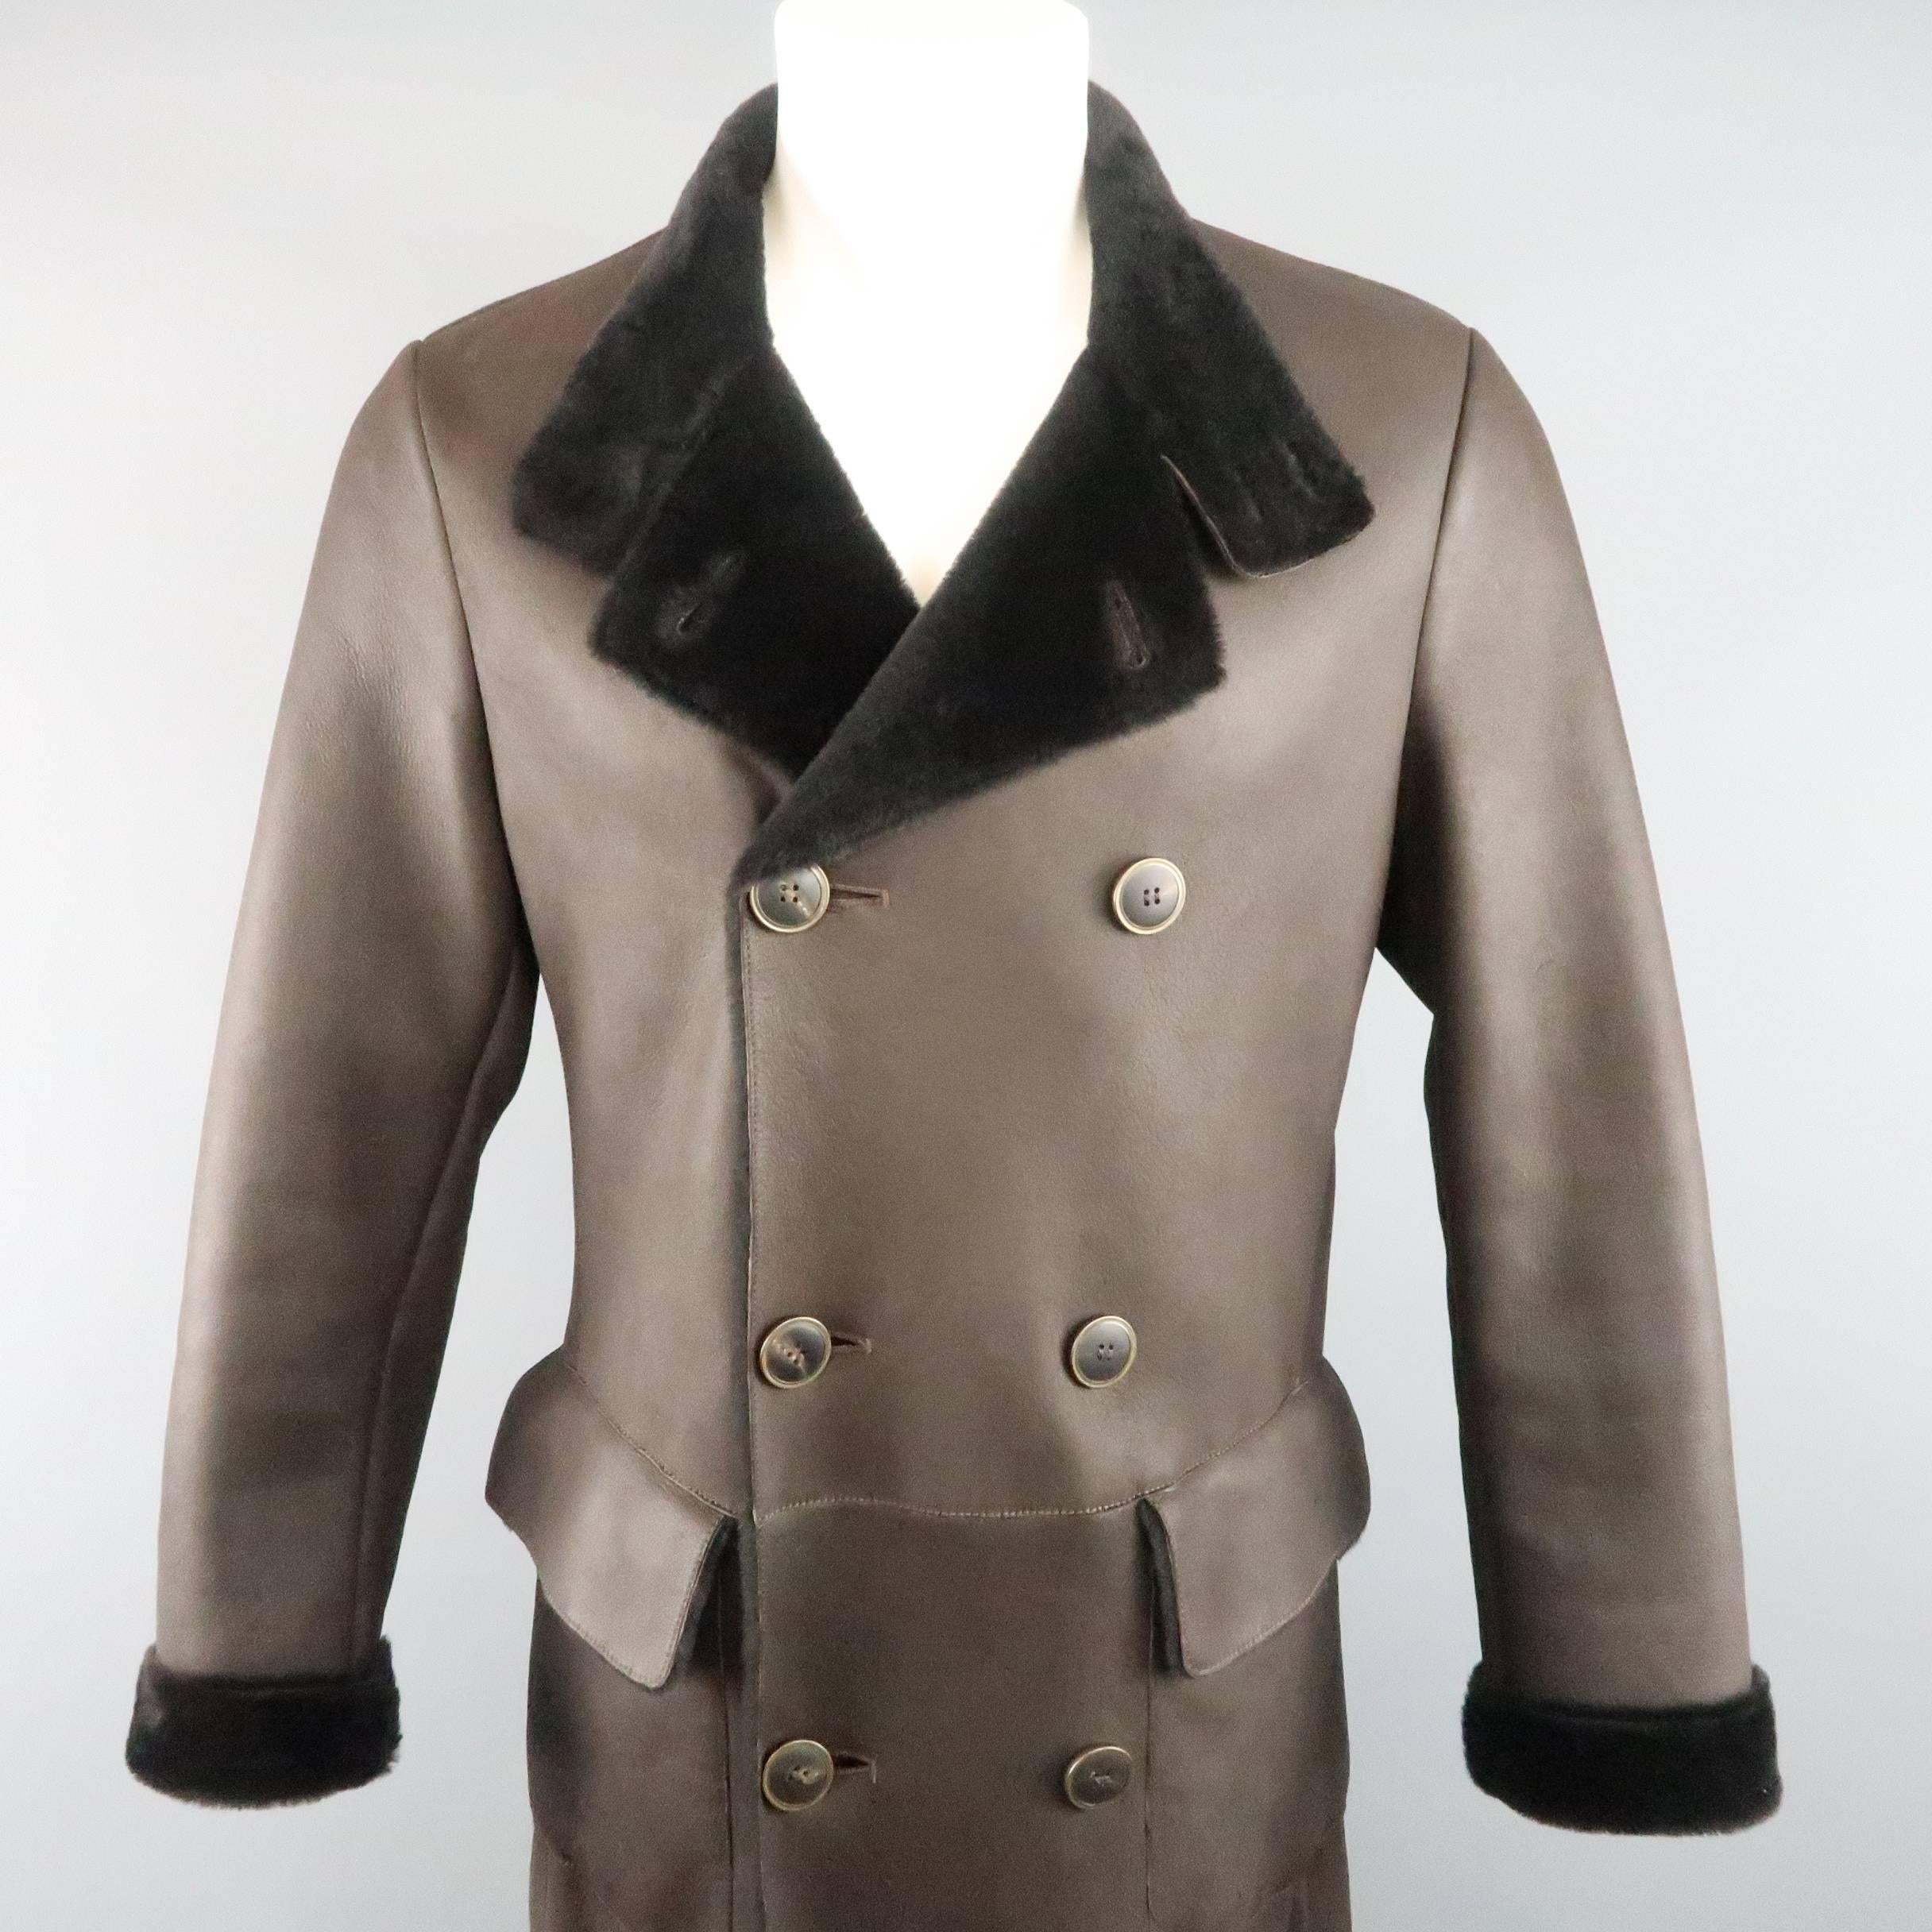 GIORGRIO ARMANI winter coat comes in chocolate brown fur shearling leather and features a double breasted button front, high collar, and flap pockets. Made in Italy.
 
Excellent Pre-Owned Condition.
Marked: IT 48
 
Measurements:
 
Shoulder: 17